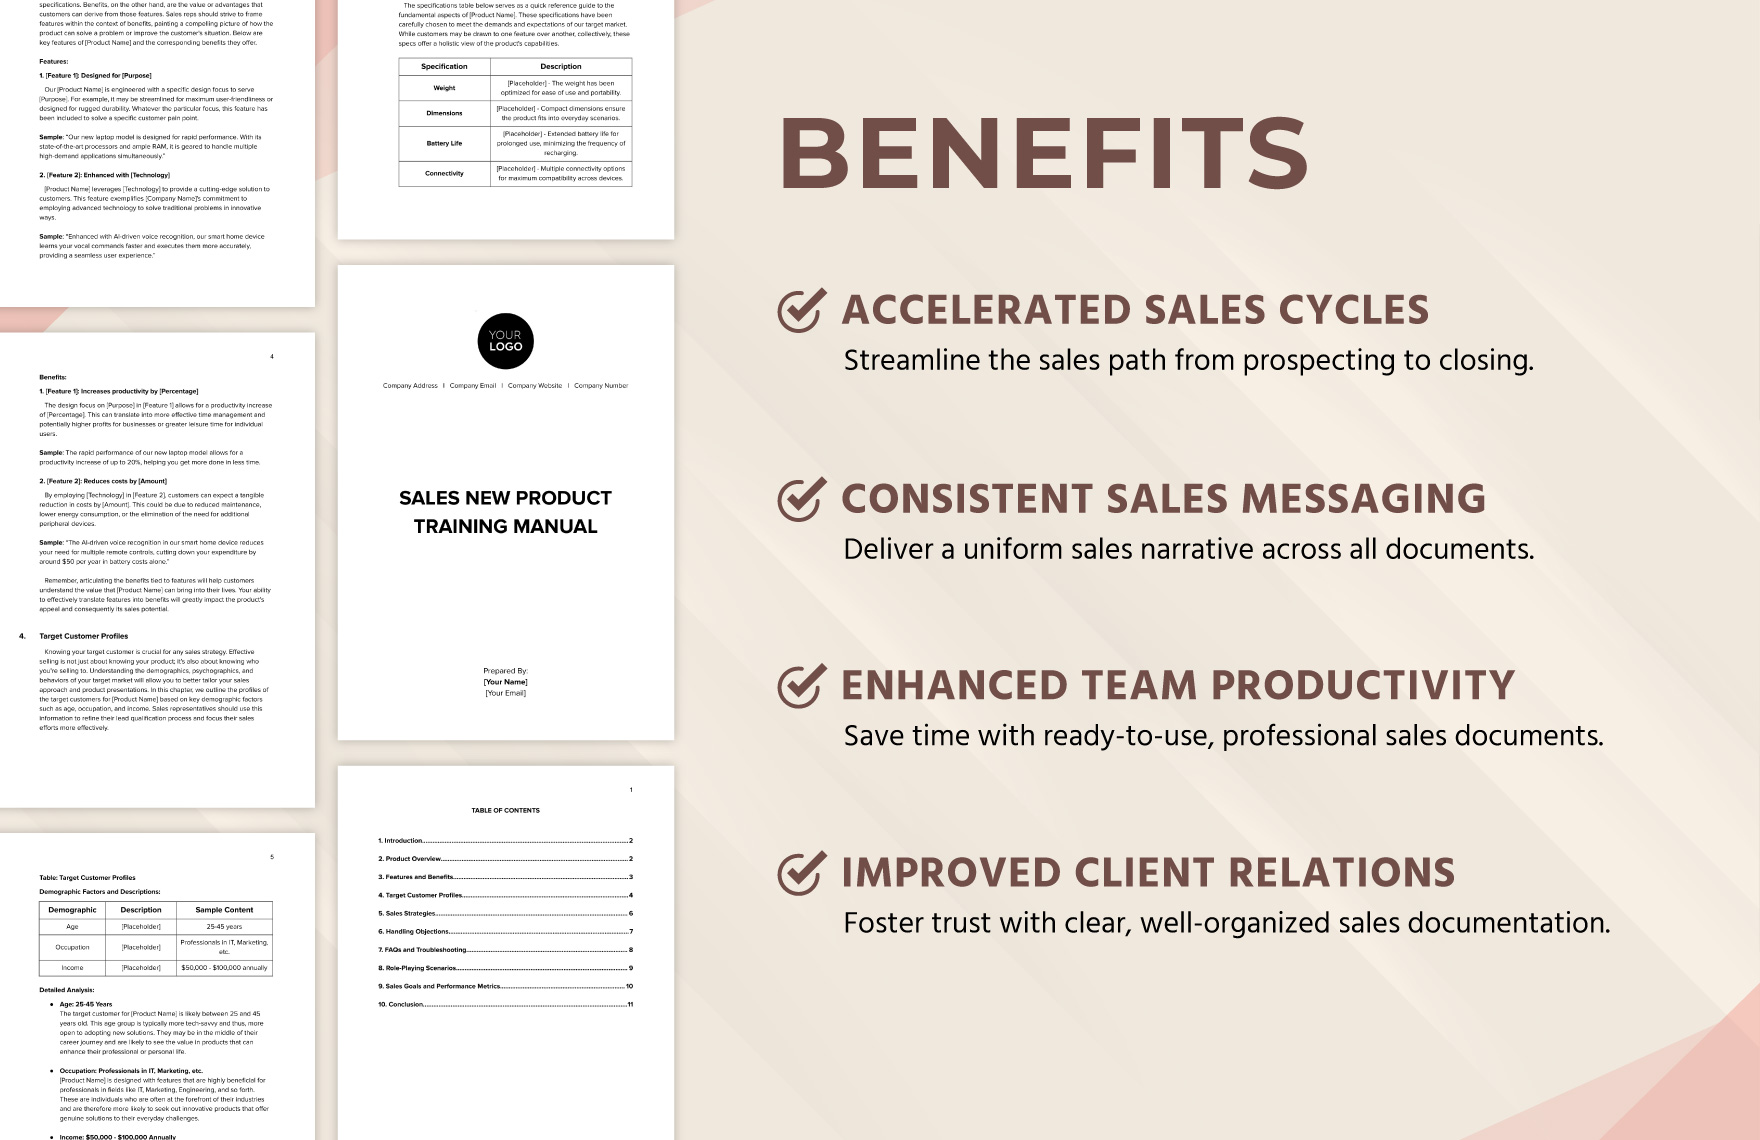 Sales New Product Training Manual Template